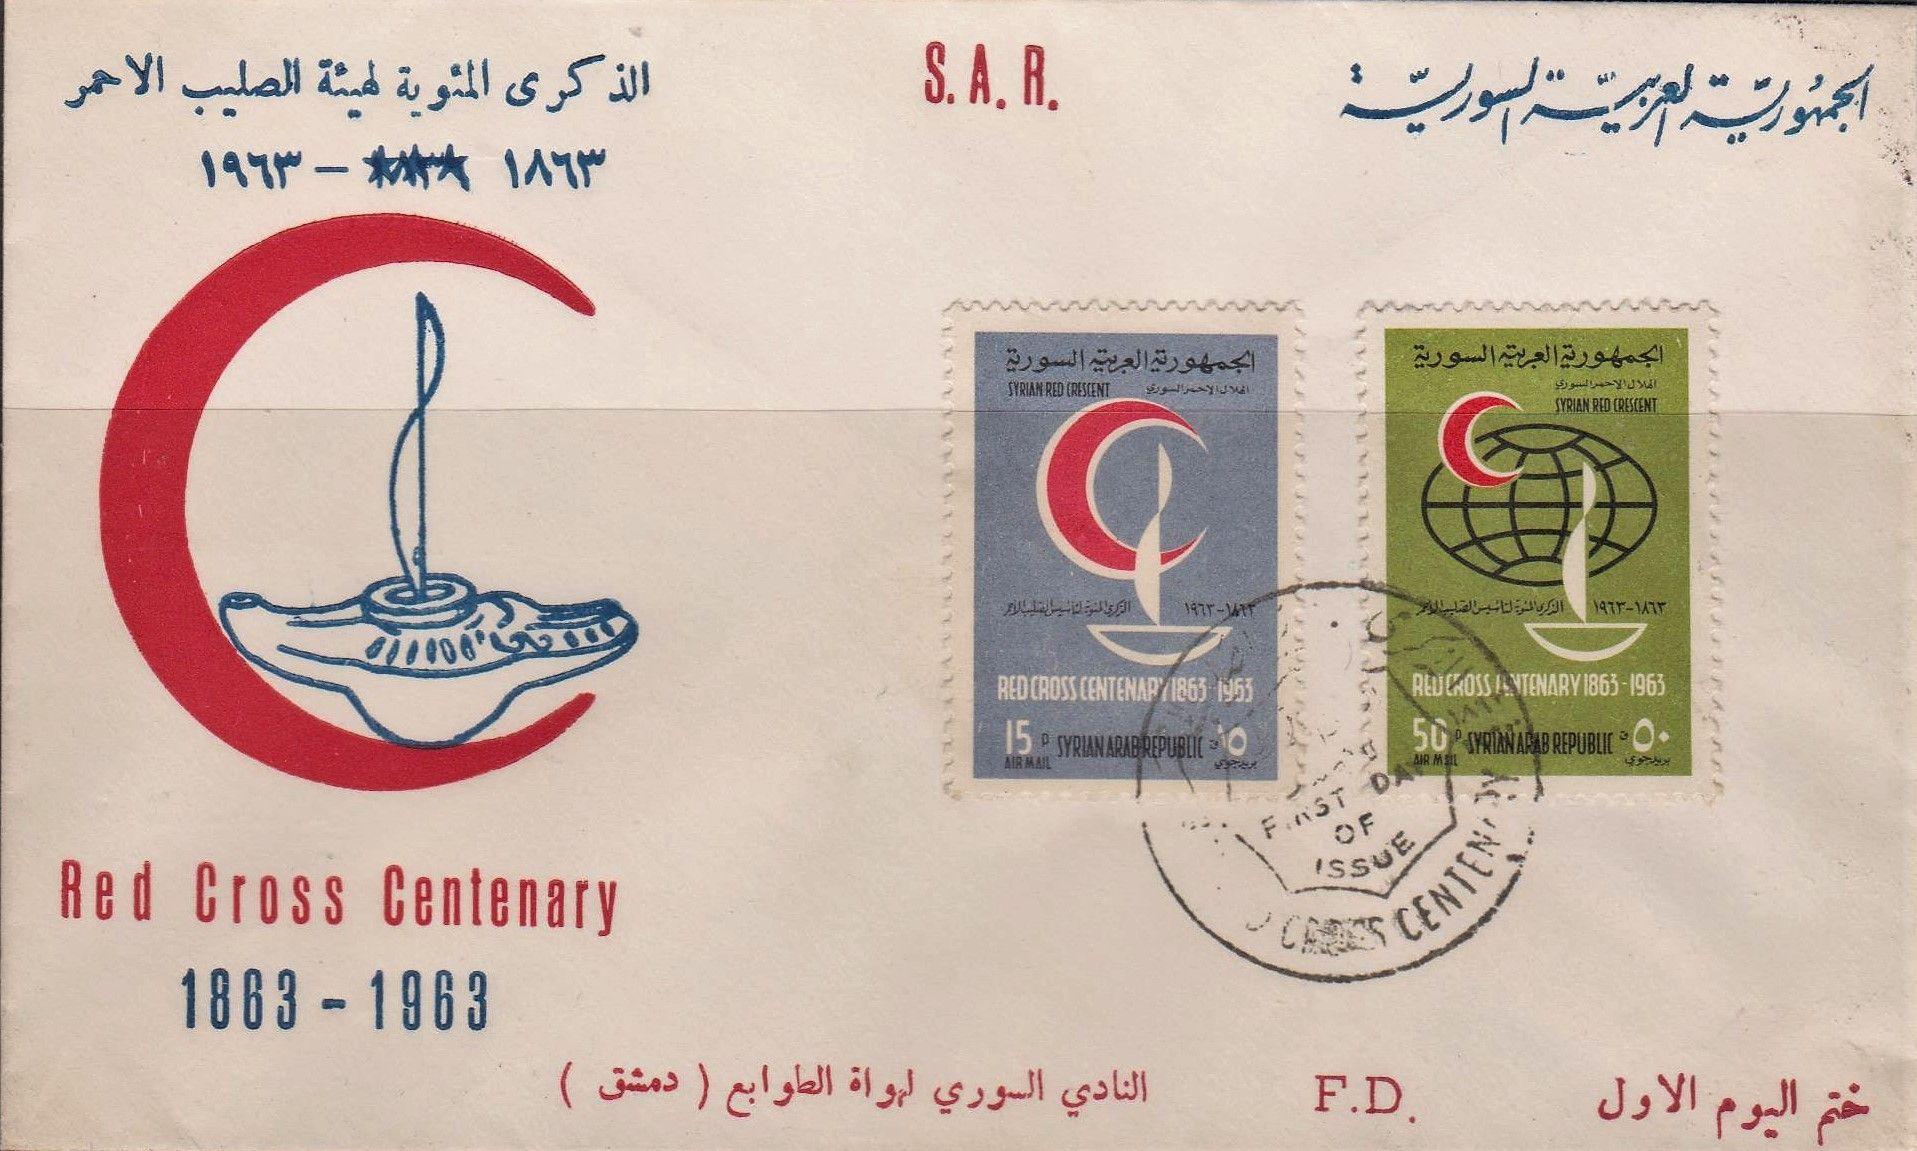 1863 International Red Cross Logo - Syria Cross First Day Cover Commemorating the 100th